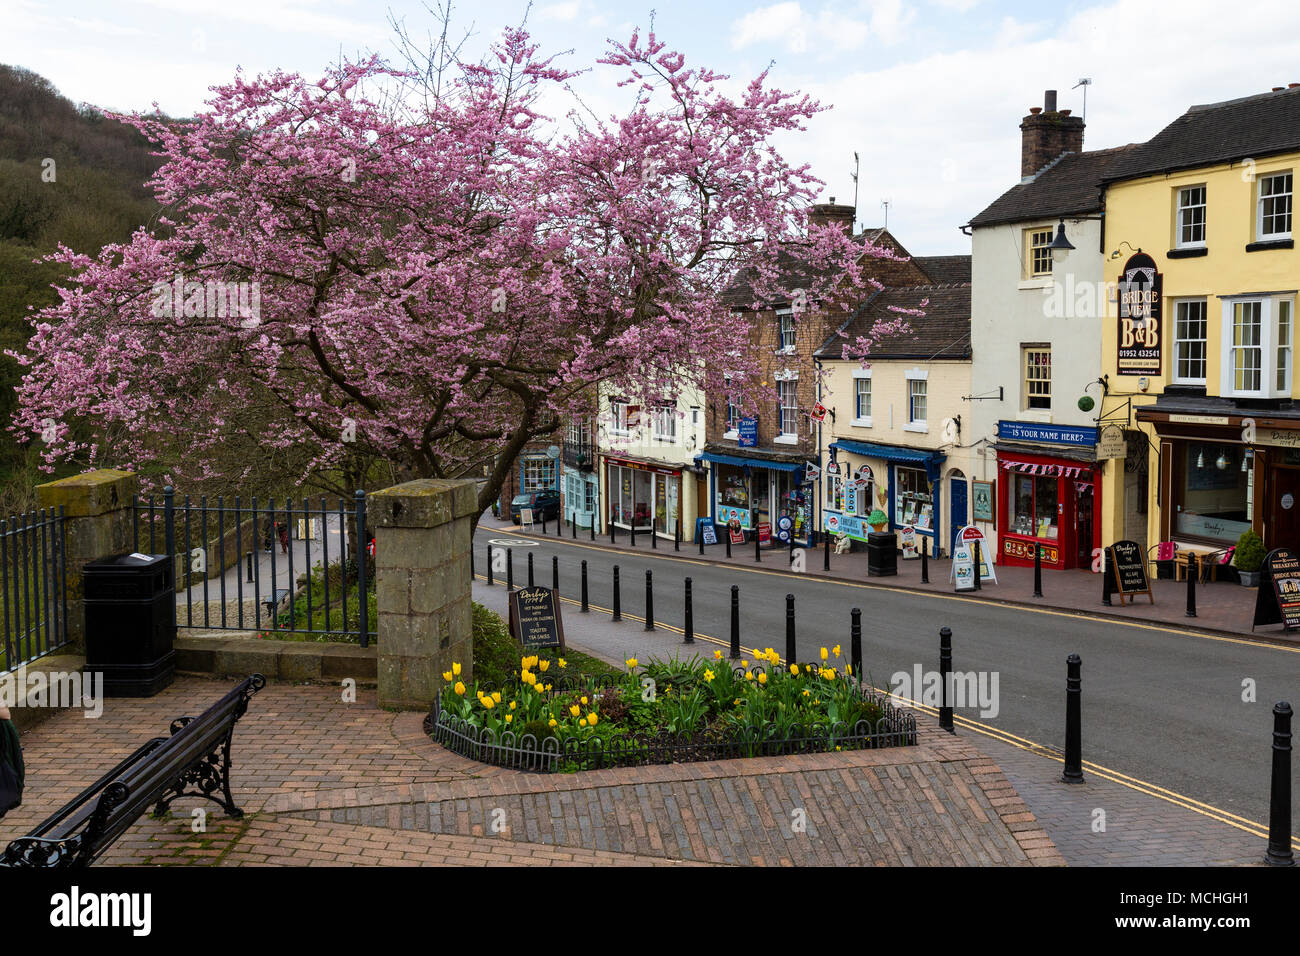 The Wharfage, the main street in Ironbridge, Shropshire, England, during spring, with cherry blossom and daffodils blooming. Stock Photo